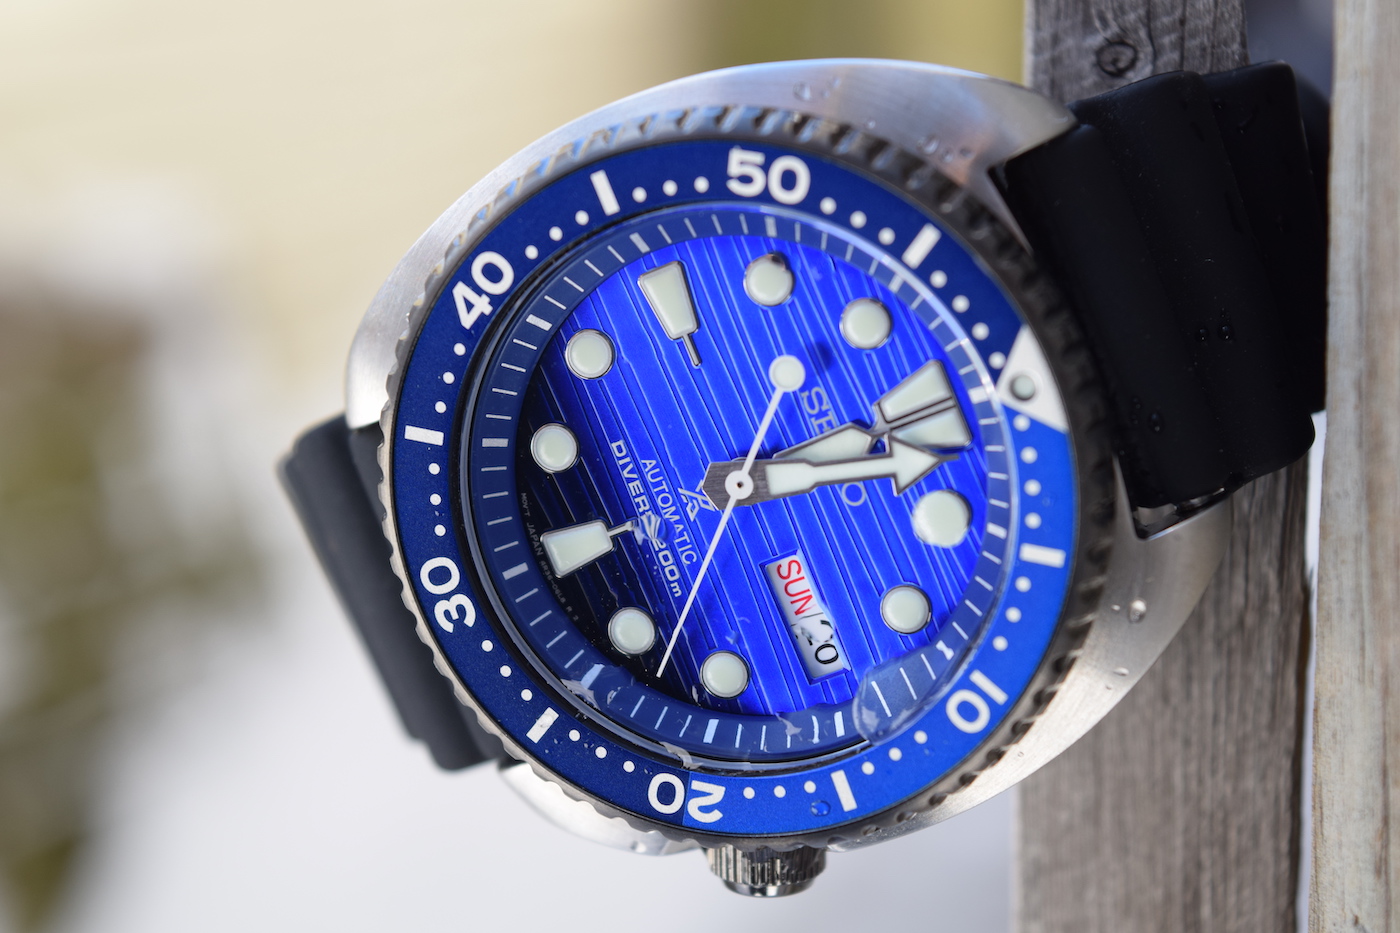 Seiko SRPC91K1 Save the Ocean Turtle Wrist Time Review | Page 2 of 2 |  aBlogtoWatch